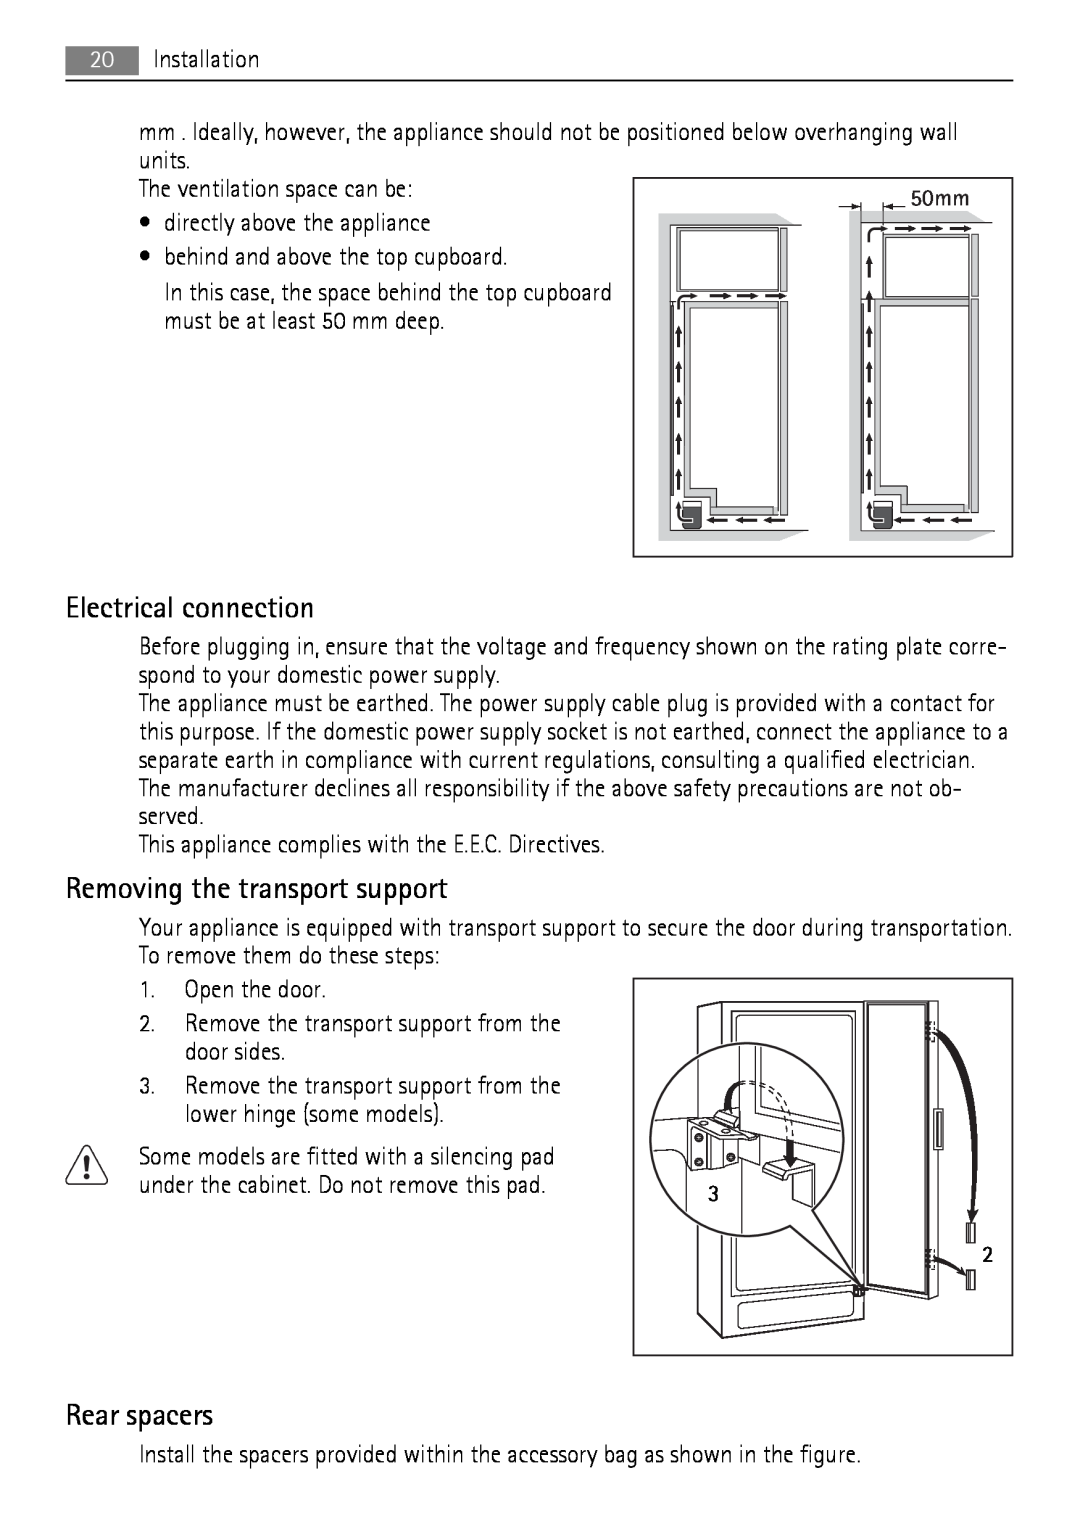 AEG A92860GNB0 user manual Electrical connection, Removing the transport support, Rear spacers 